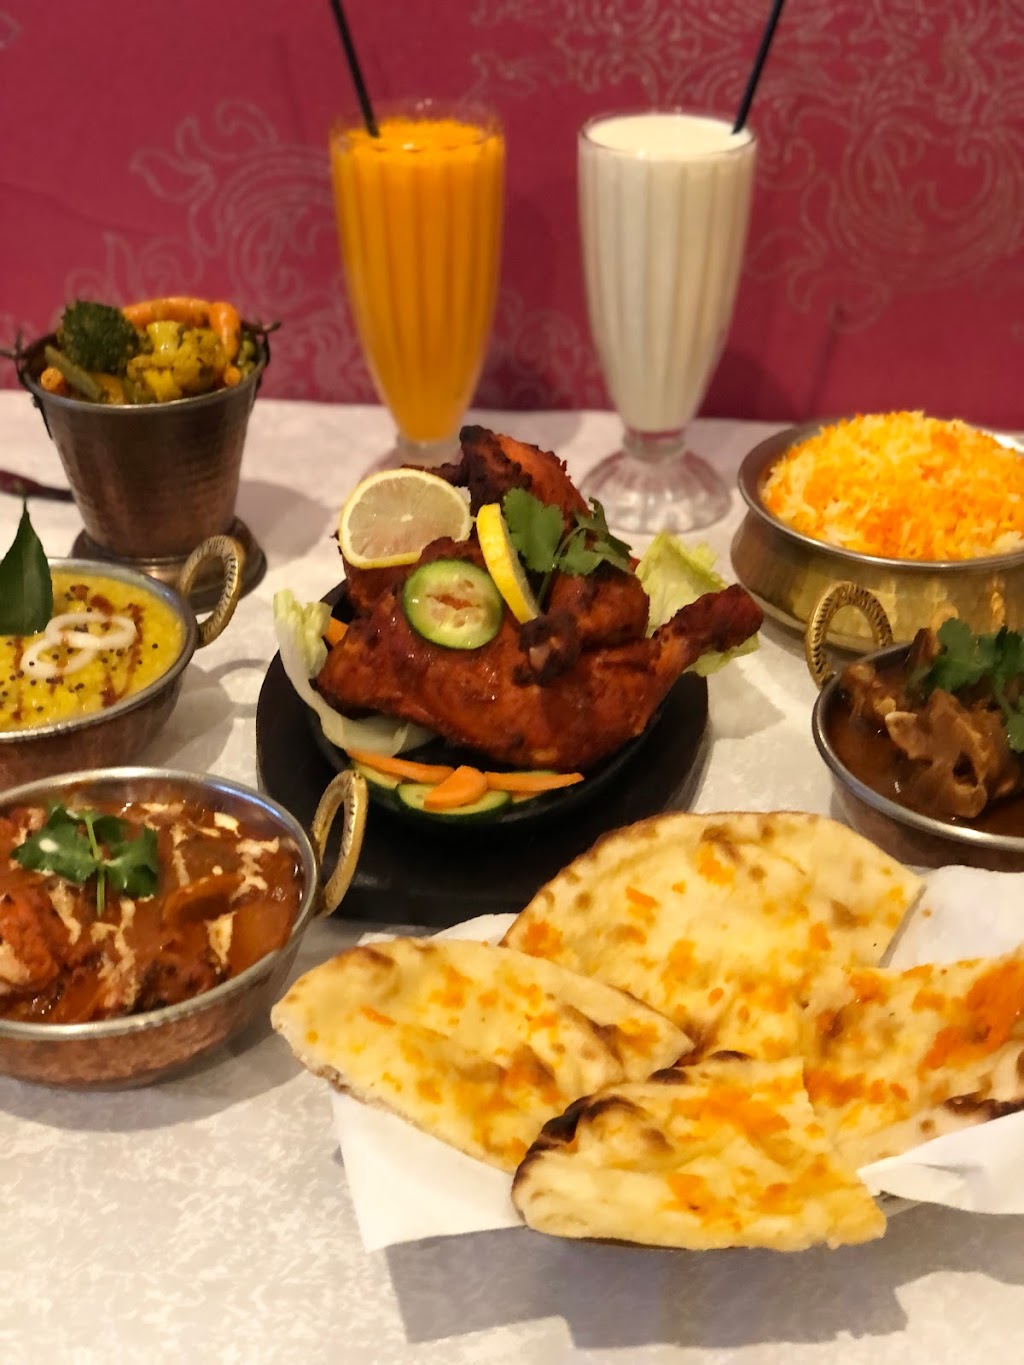 Mehek Indian Restaurant | meal delivery | 8 Main St, Greensborough VIC 3088, Australia | 0394345209 OR +61 3 9434 5209